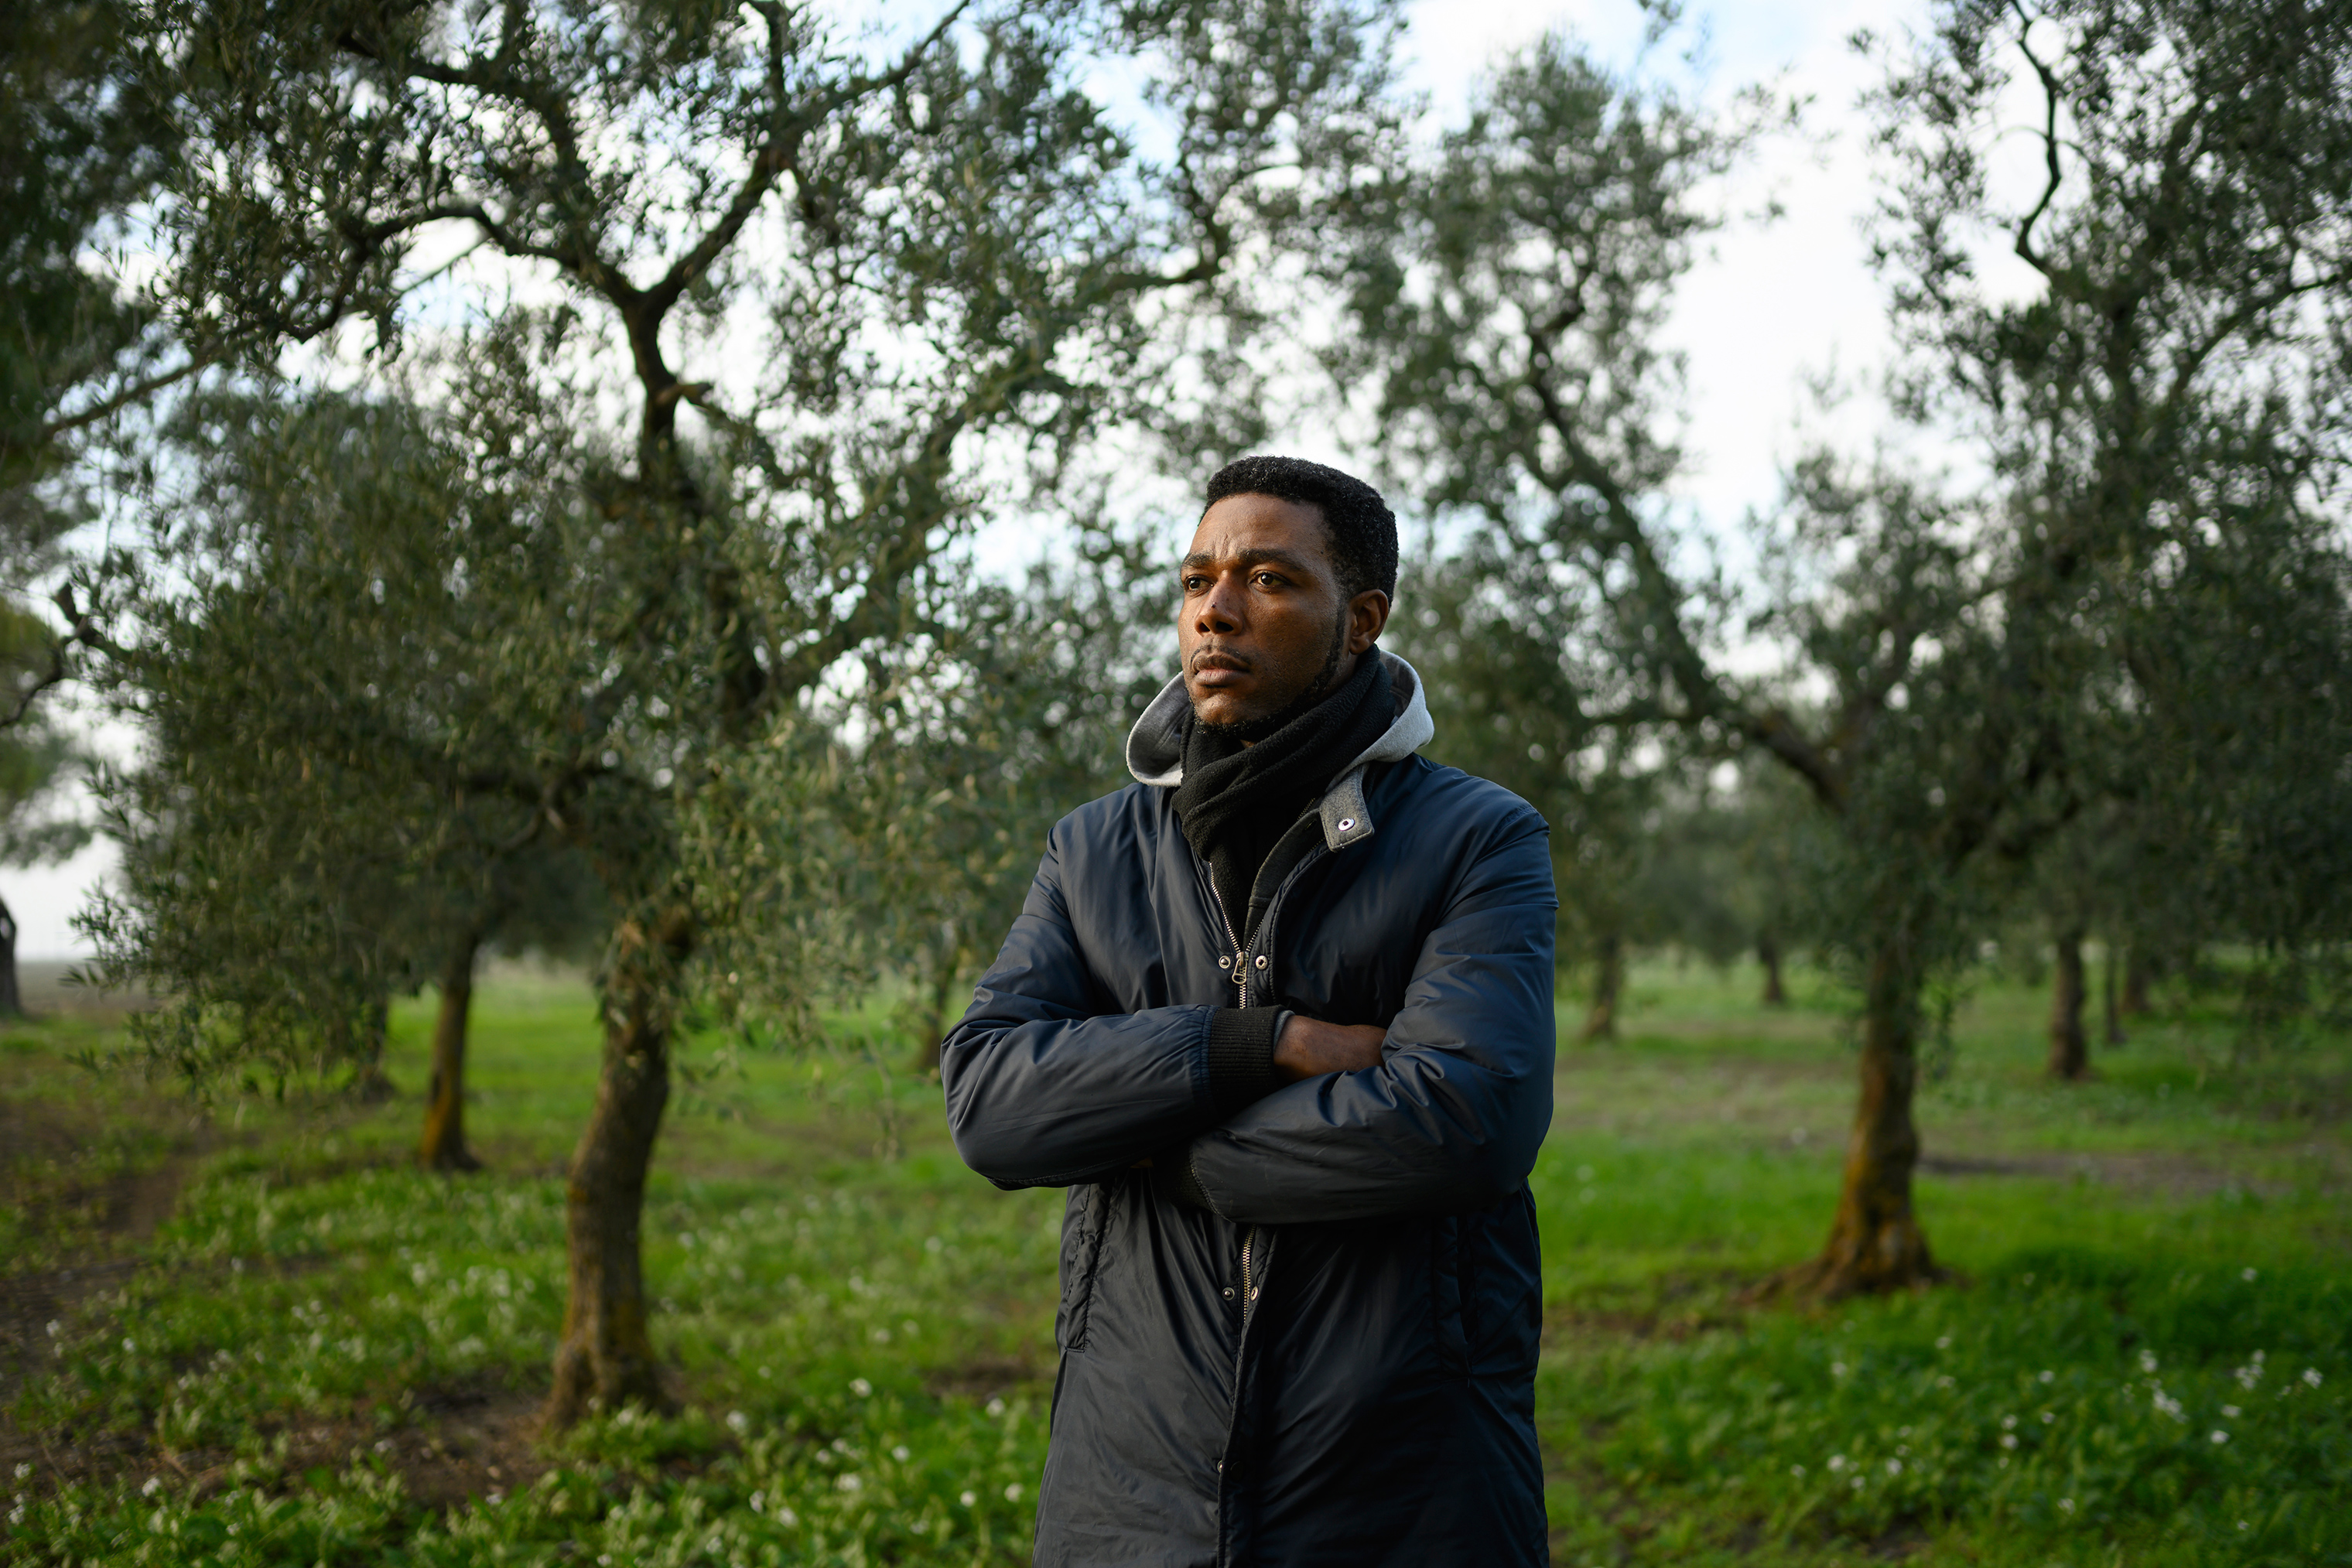 Sagnet, 33, an anti-slavery activist from Cameroon who has been living in Italy since 2010, stands in the olive groves around Foggia, Italy, Dec. 4, 2018. (Lynsey Addario for TIME)